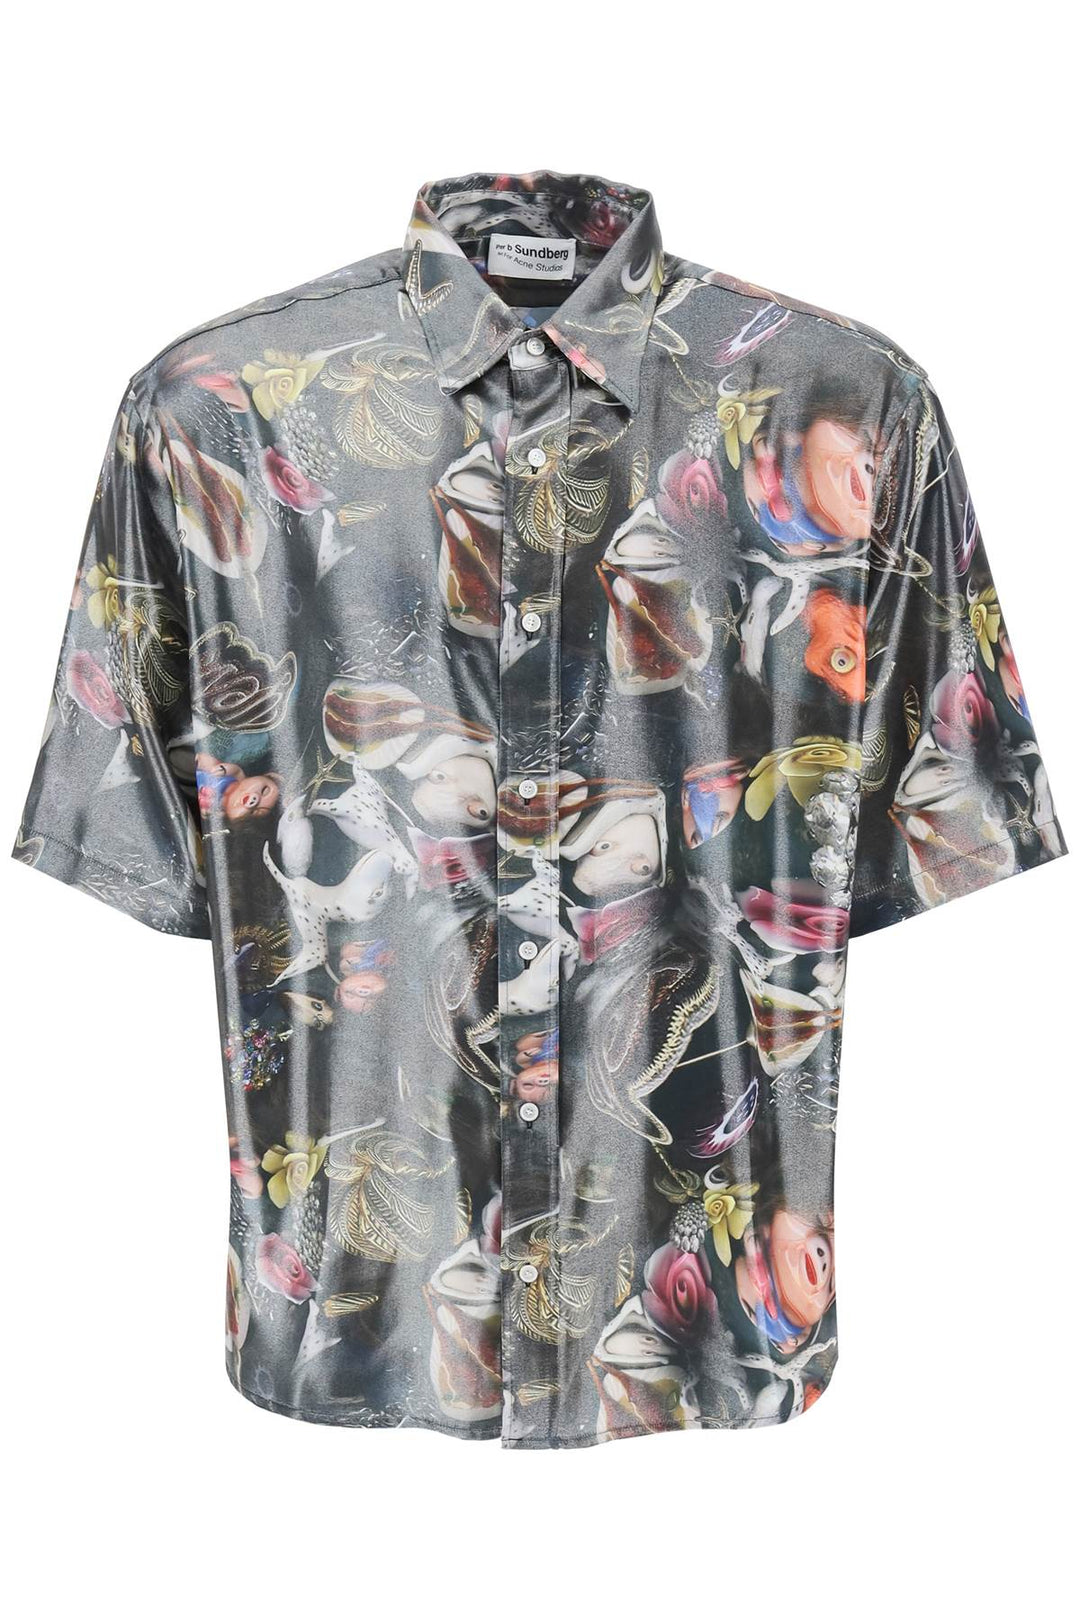 Acne Studios Short Sleeved Shirt With Print For B. Sund   Multicolor